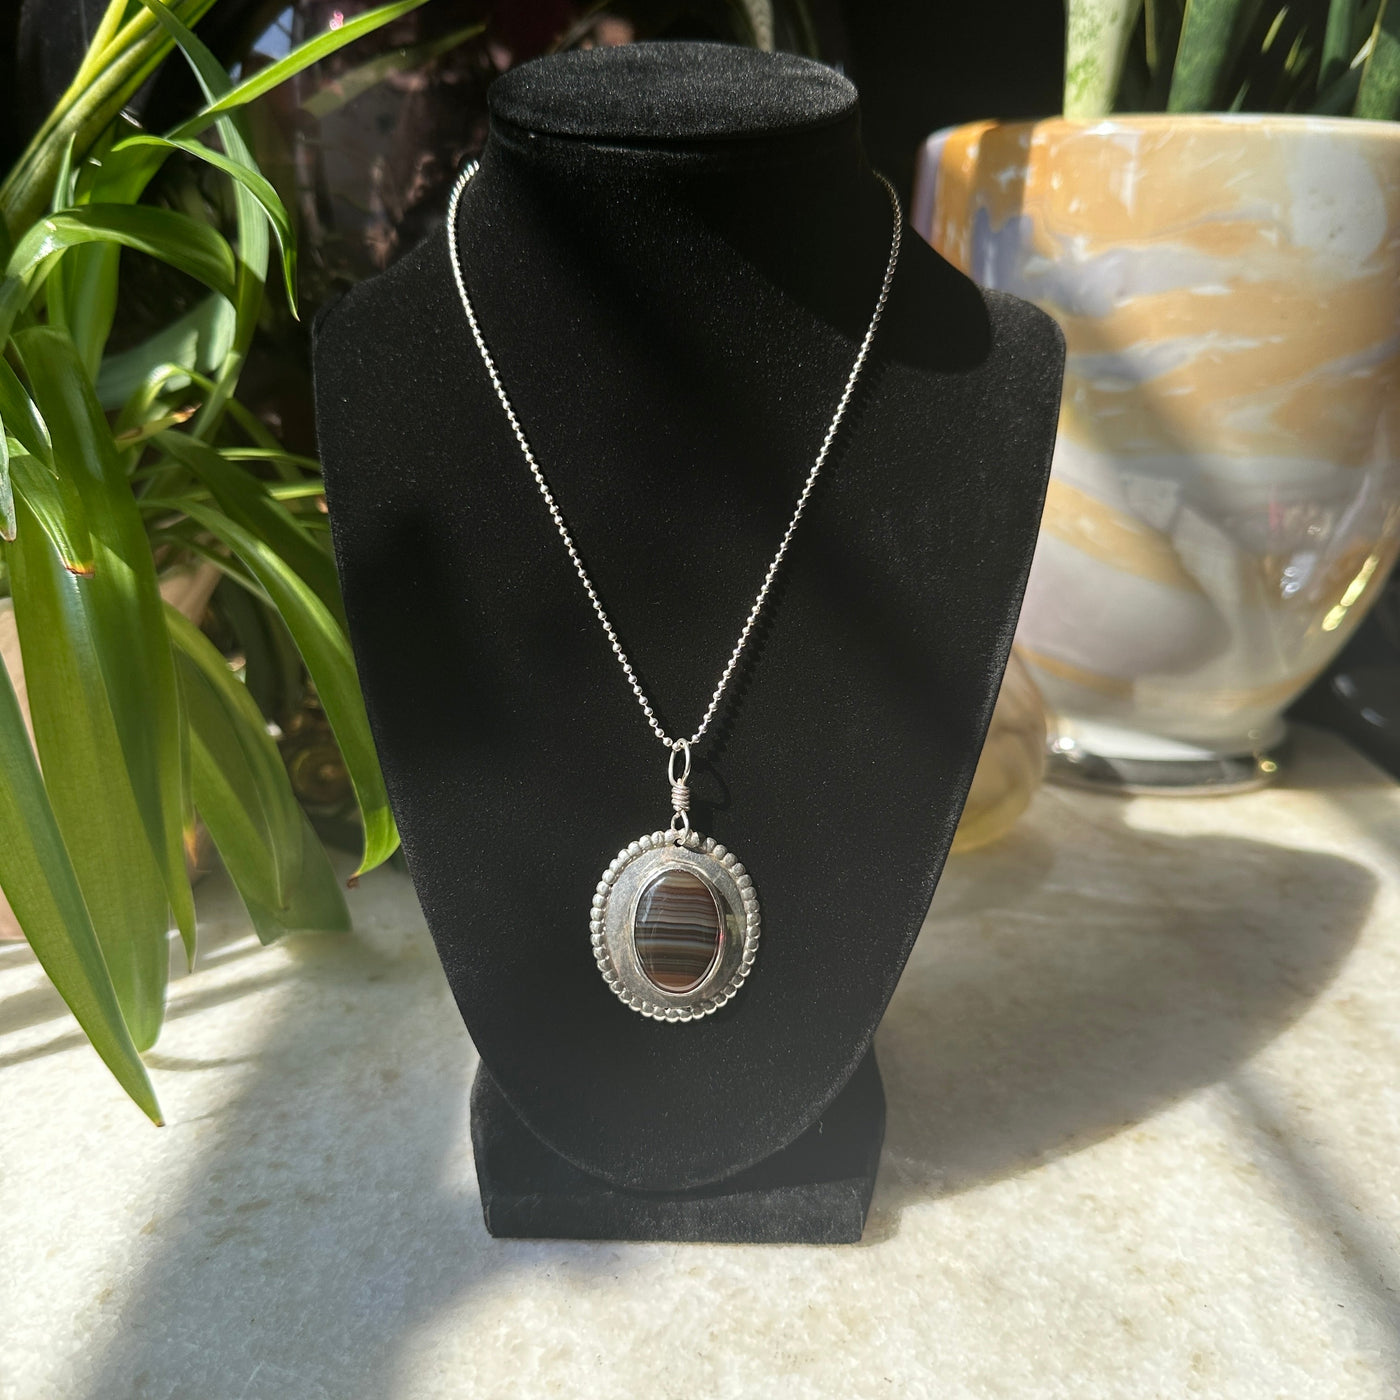 Handmade Sterling Silver and Banded Agate Pendant Necklace